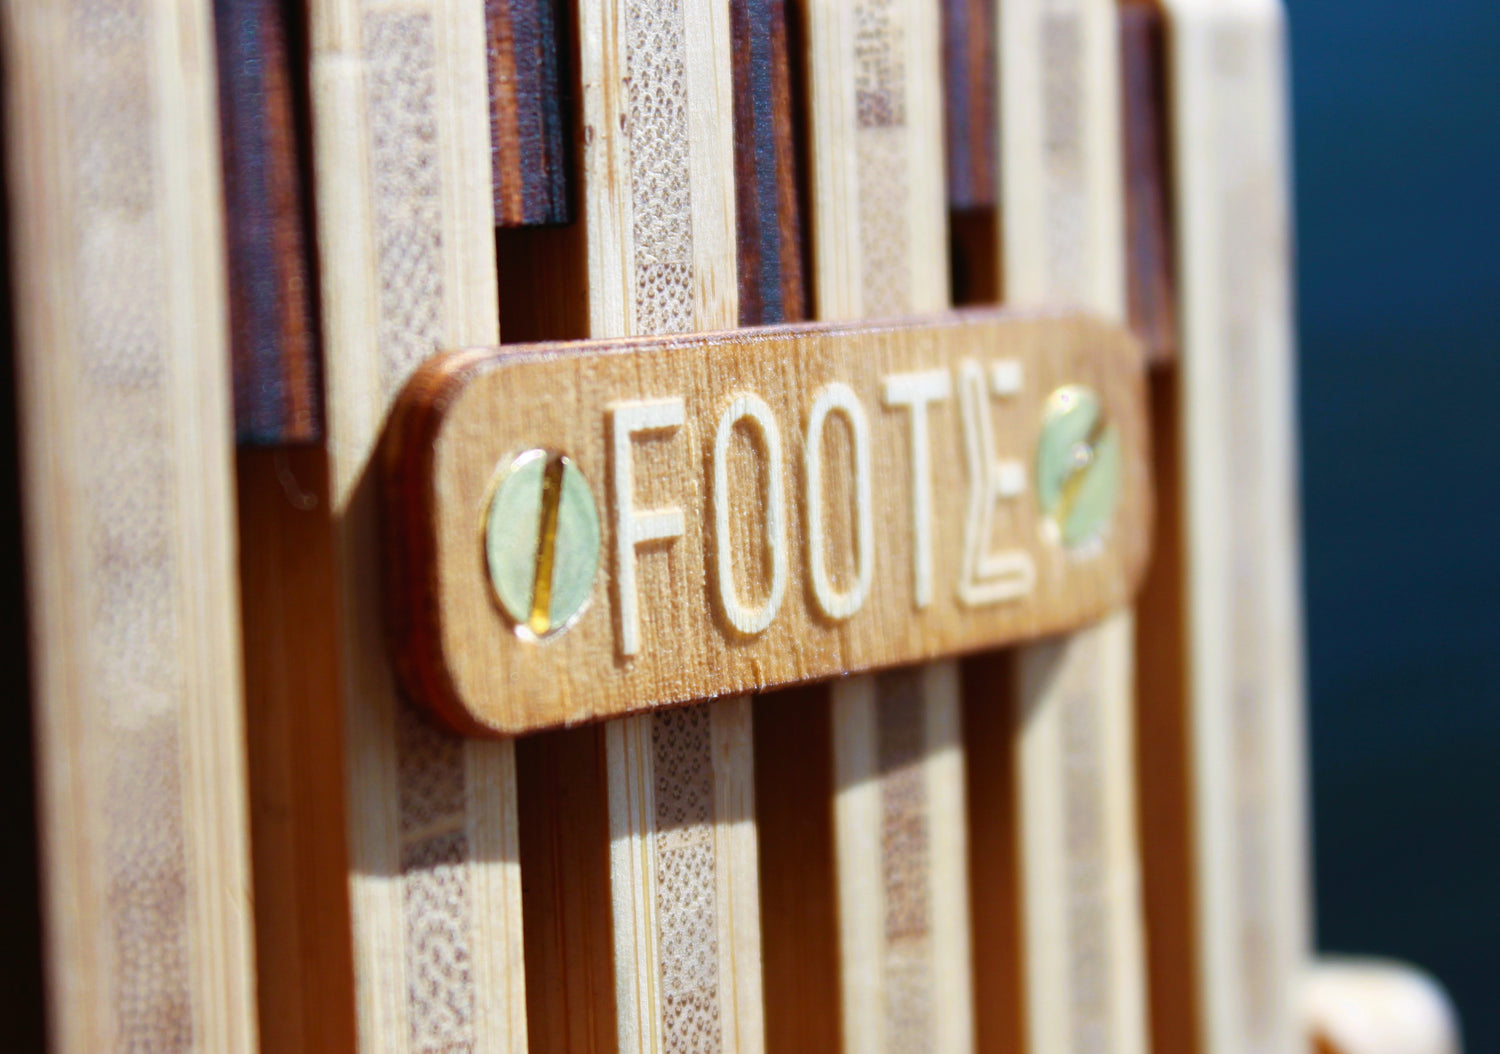 Close-up of a Foote nametag.